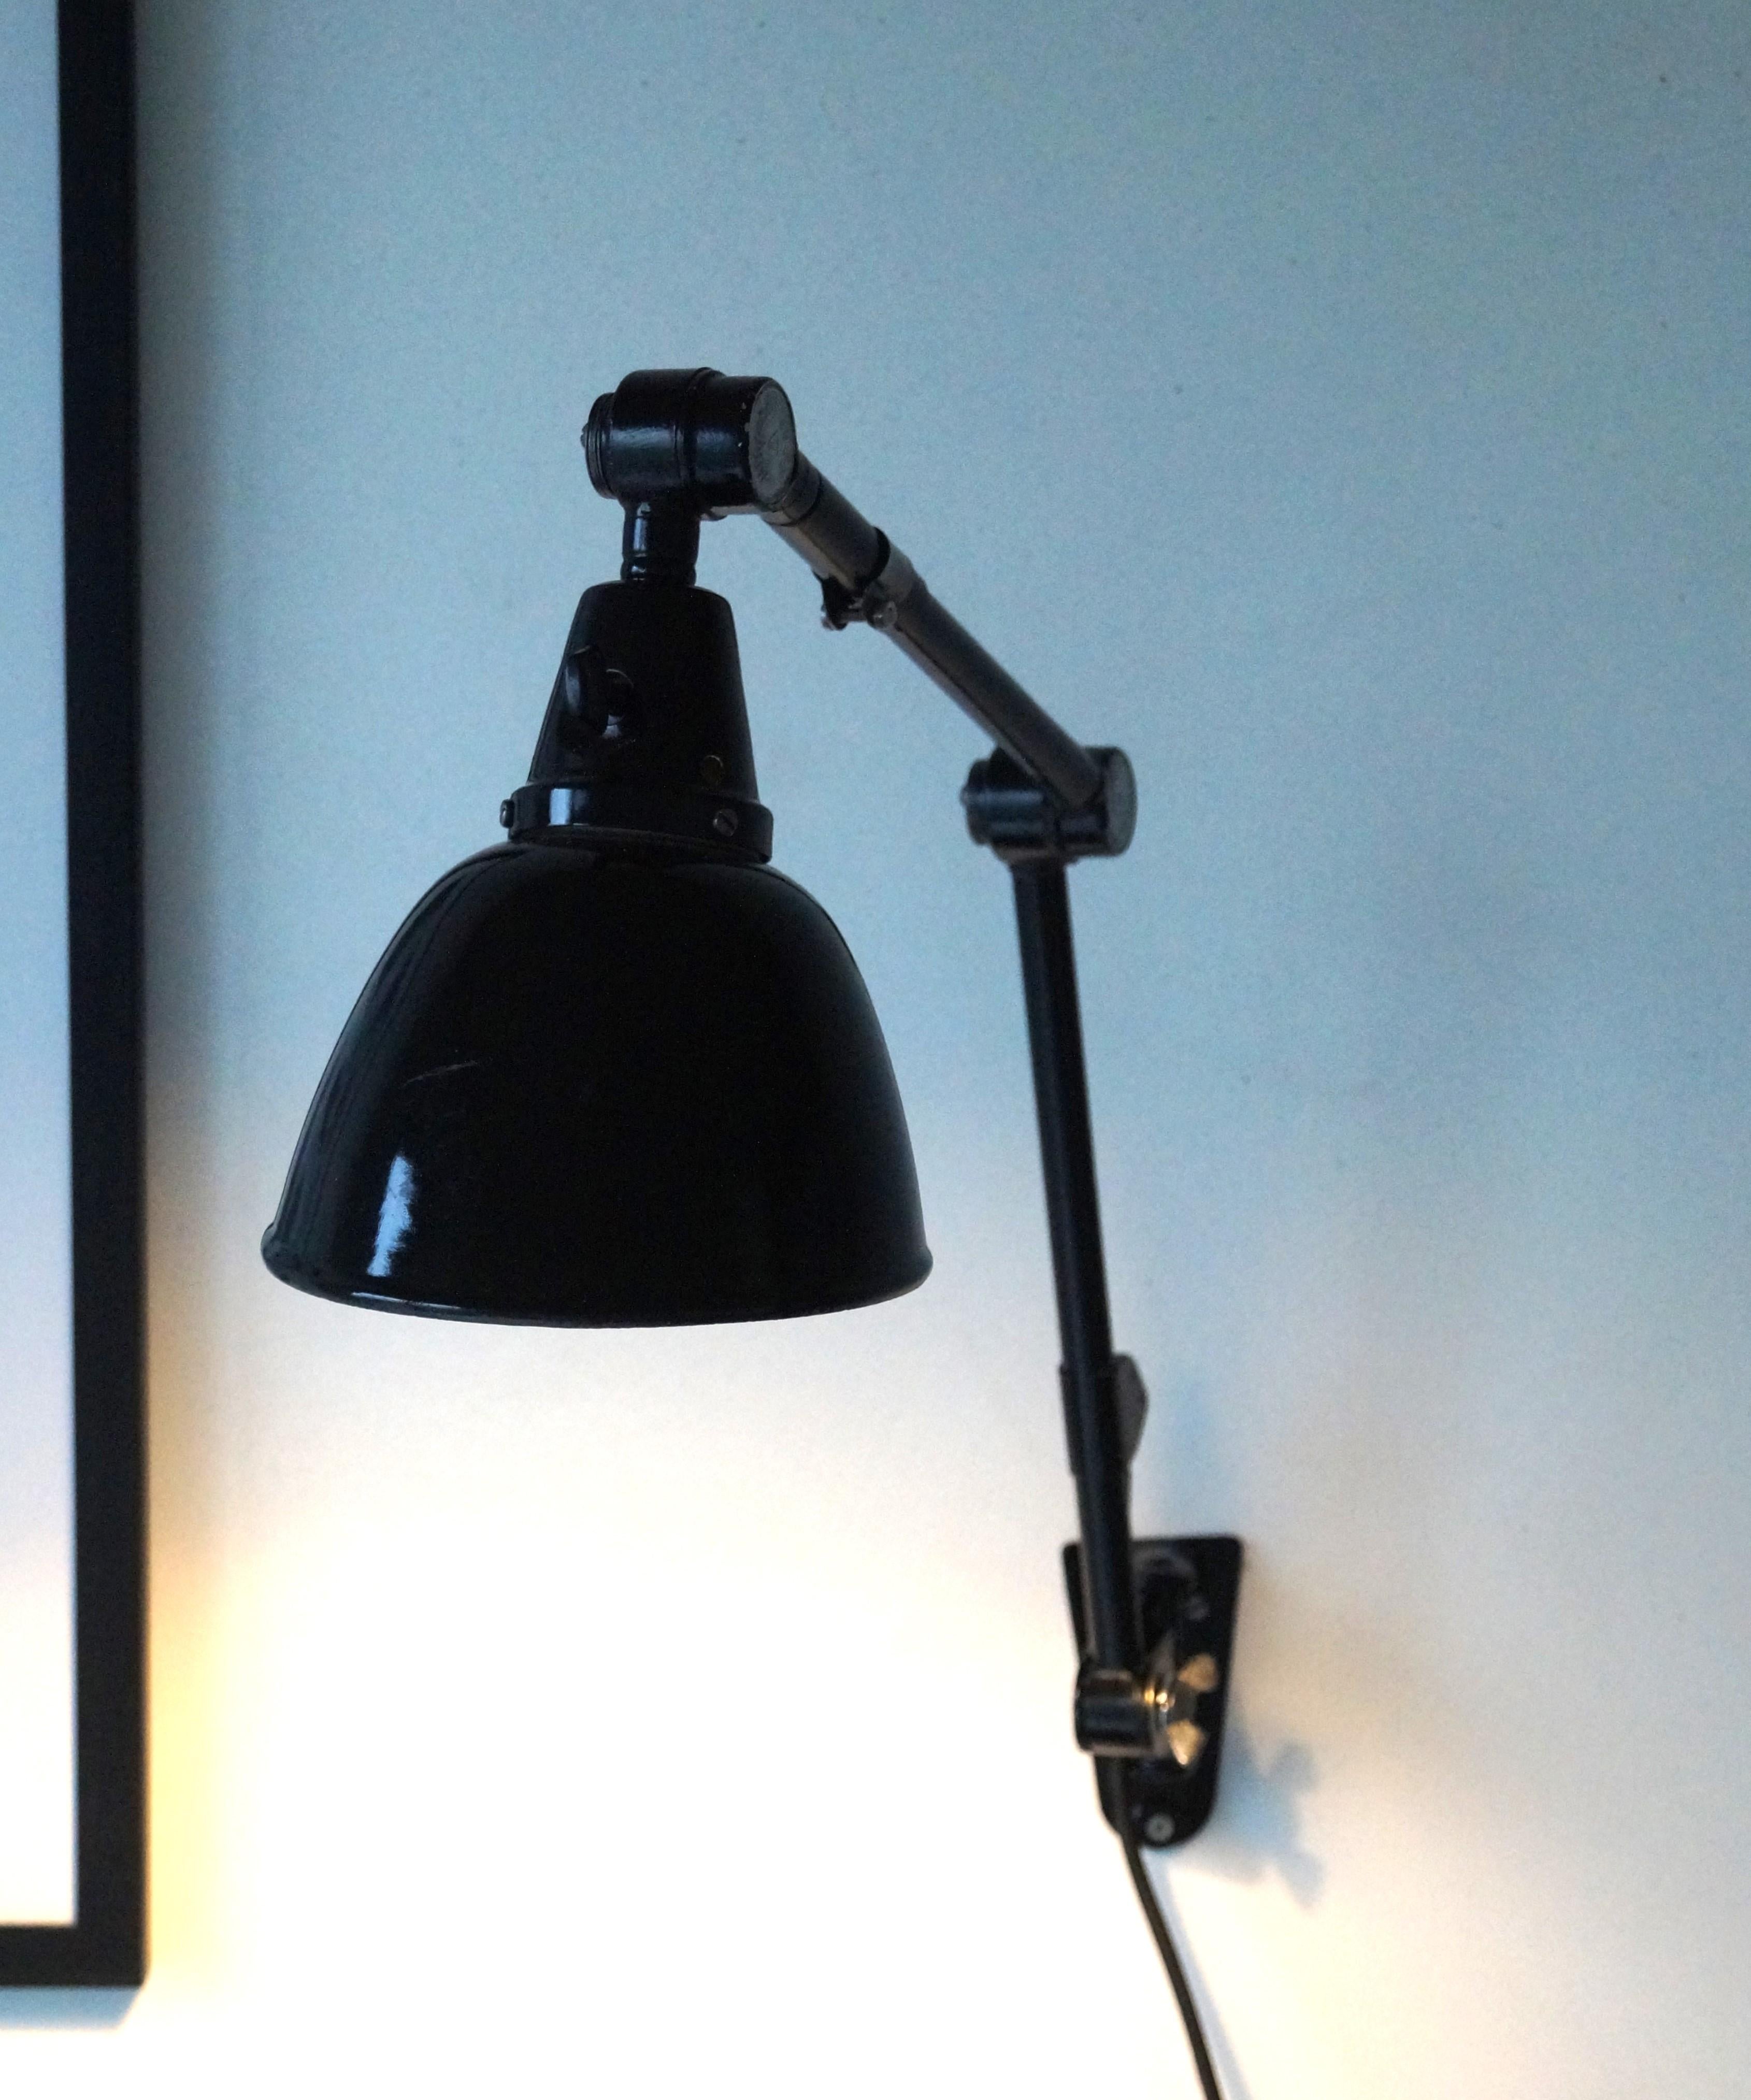 A TYP 505 wall mounted lamp, based on the iconic TYP 113. This modular lamp was produced with 3 different arm lengths, 3 types of (rotating) lampshades and a choice in type of joints.

The lamp is in good condition, rewired and all parts working and